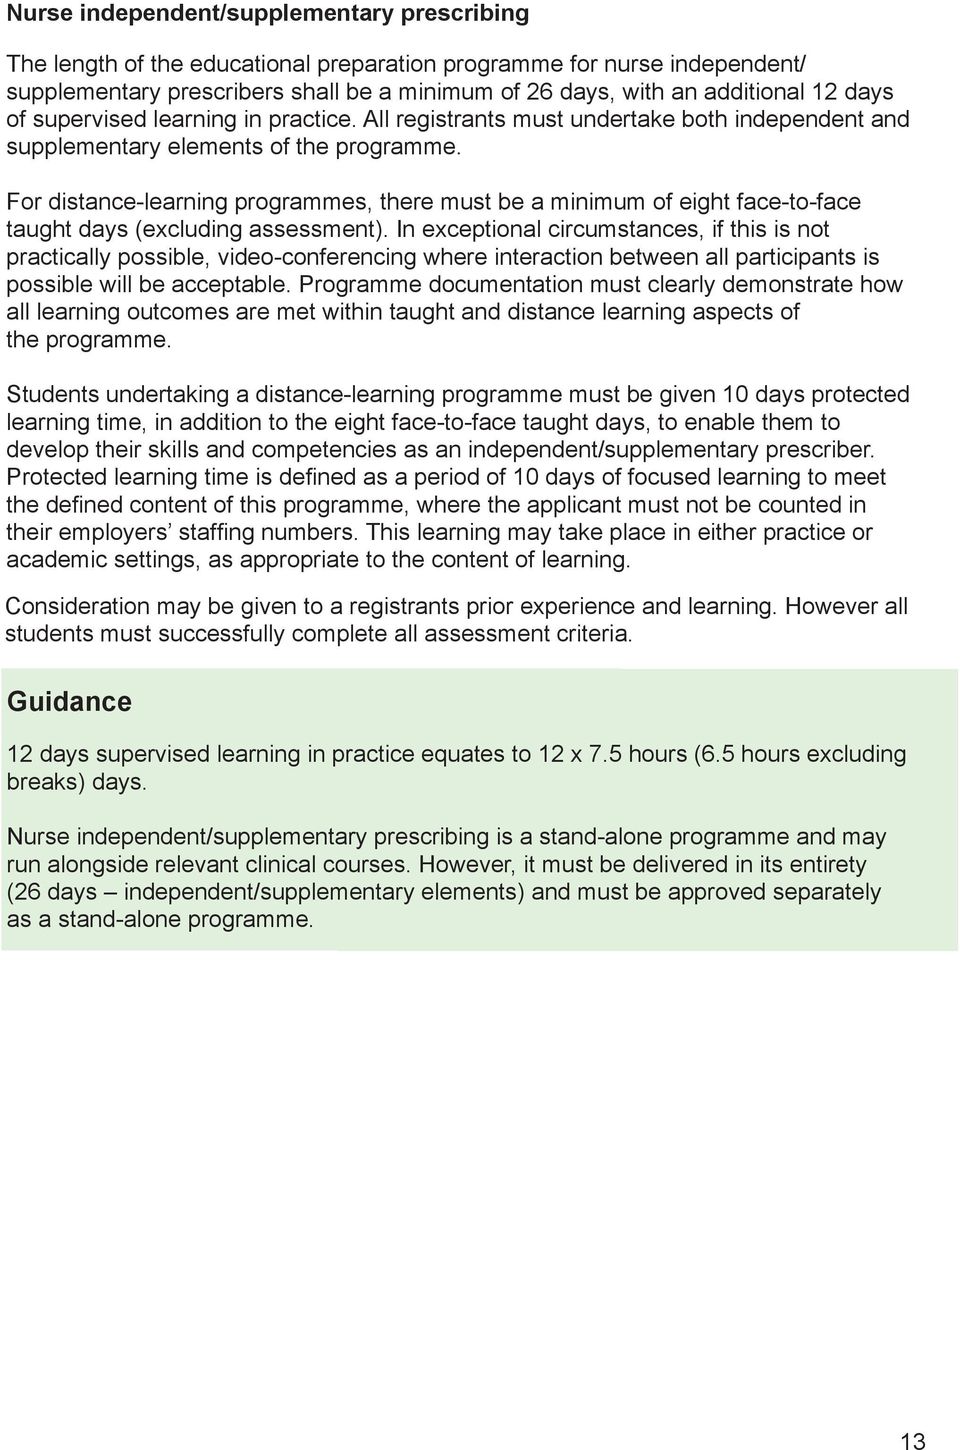 For distance-learning programmes, there must be a minimum of eight face-to-face taught days (excluding assessment).